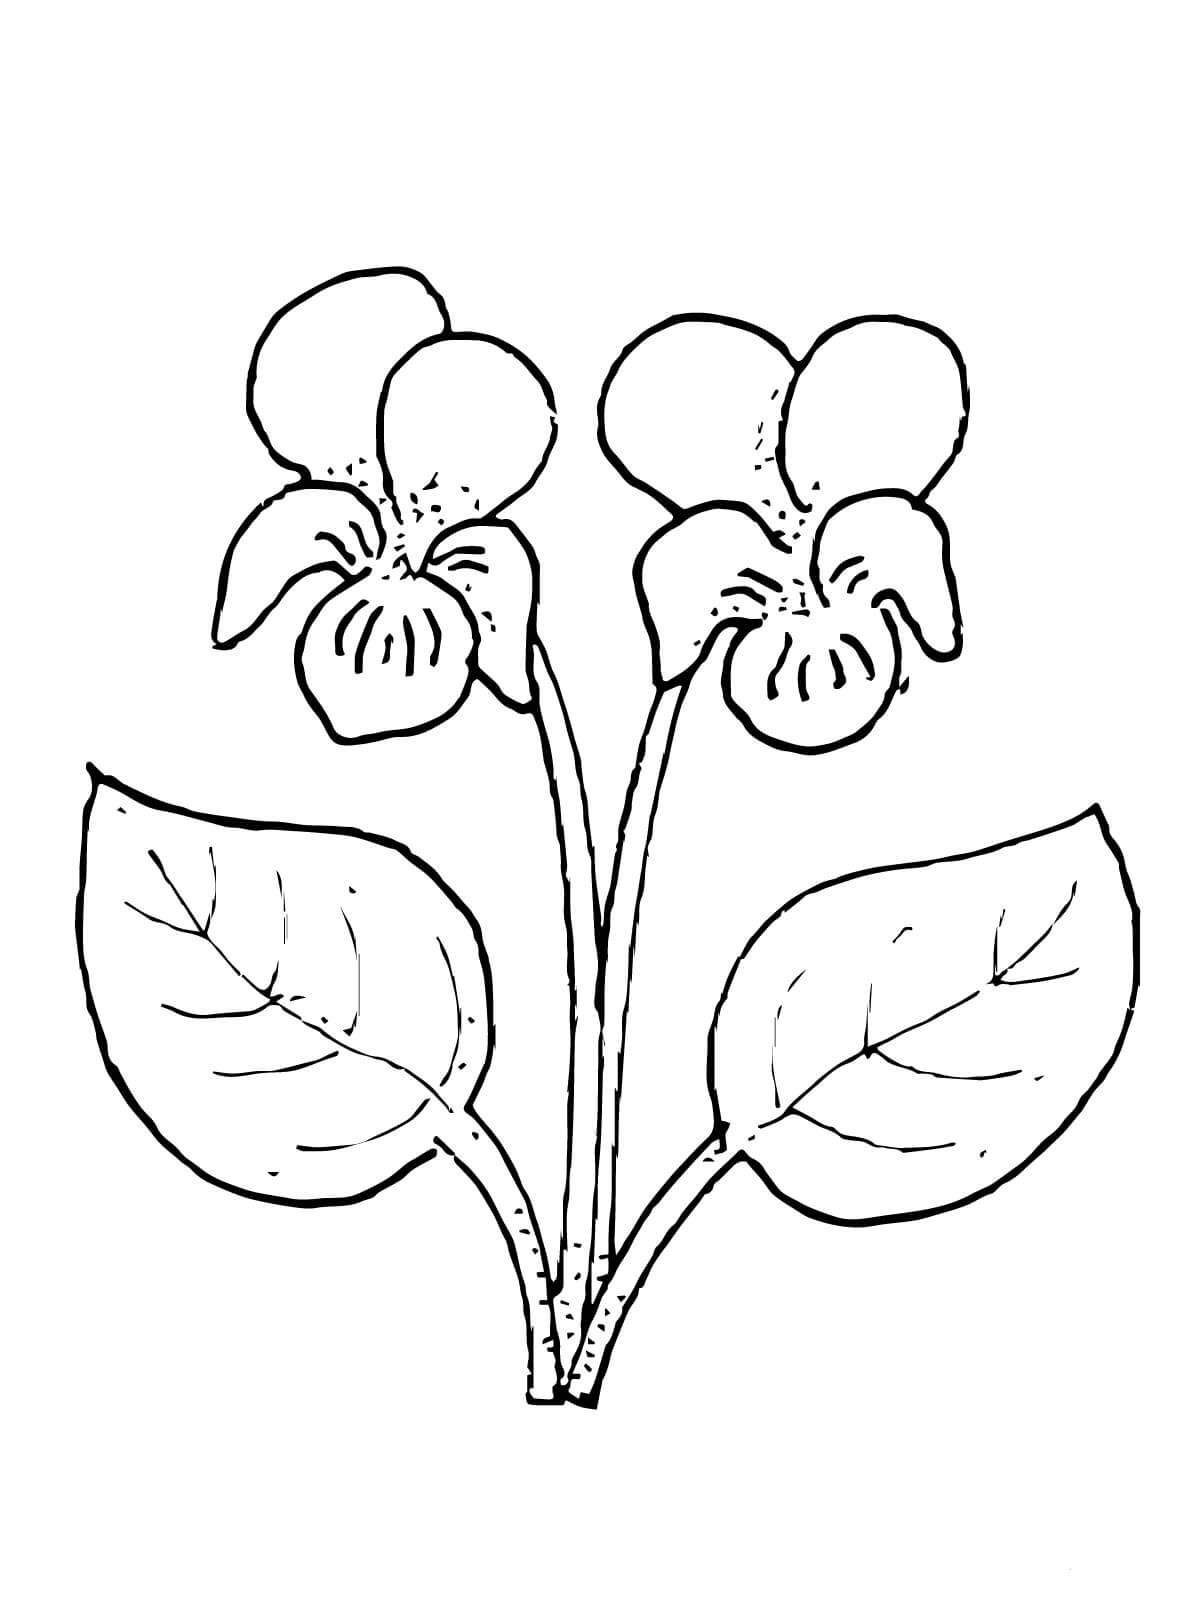 Coloring picture of beautiful flowers